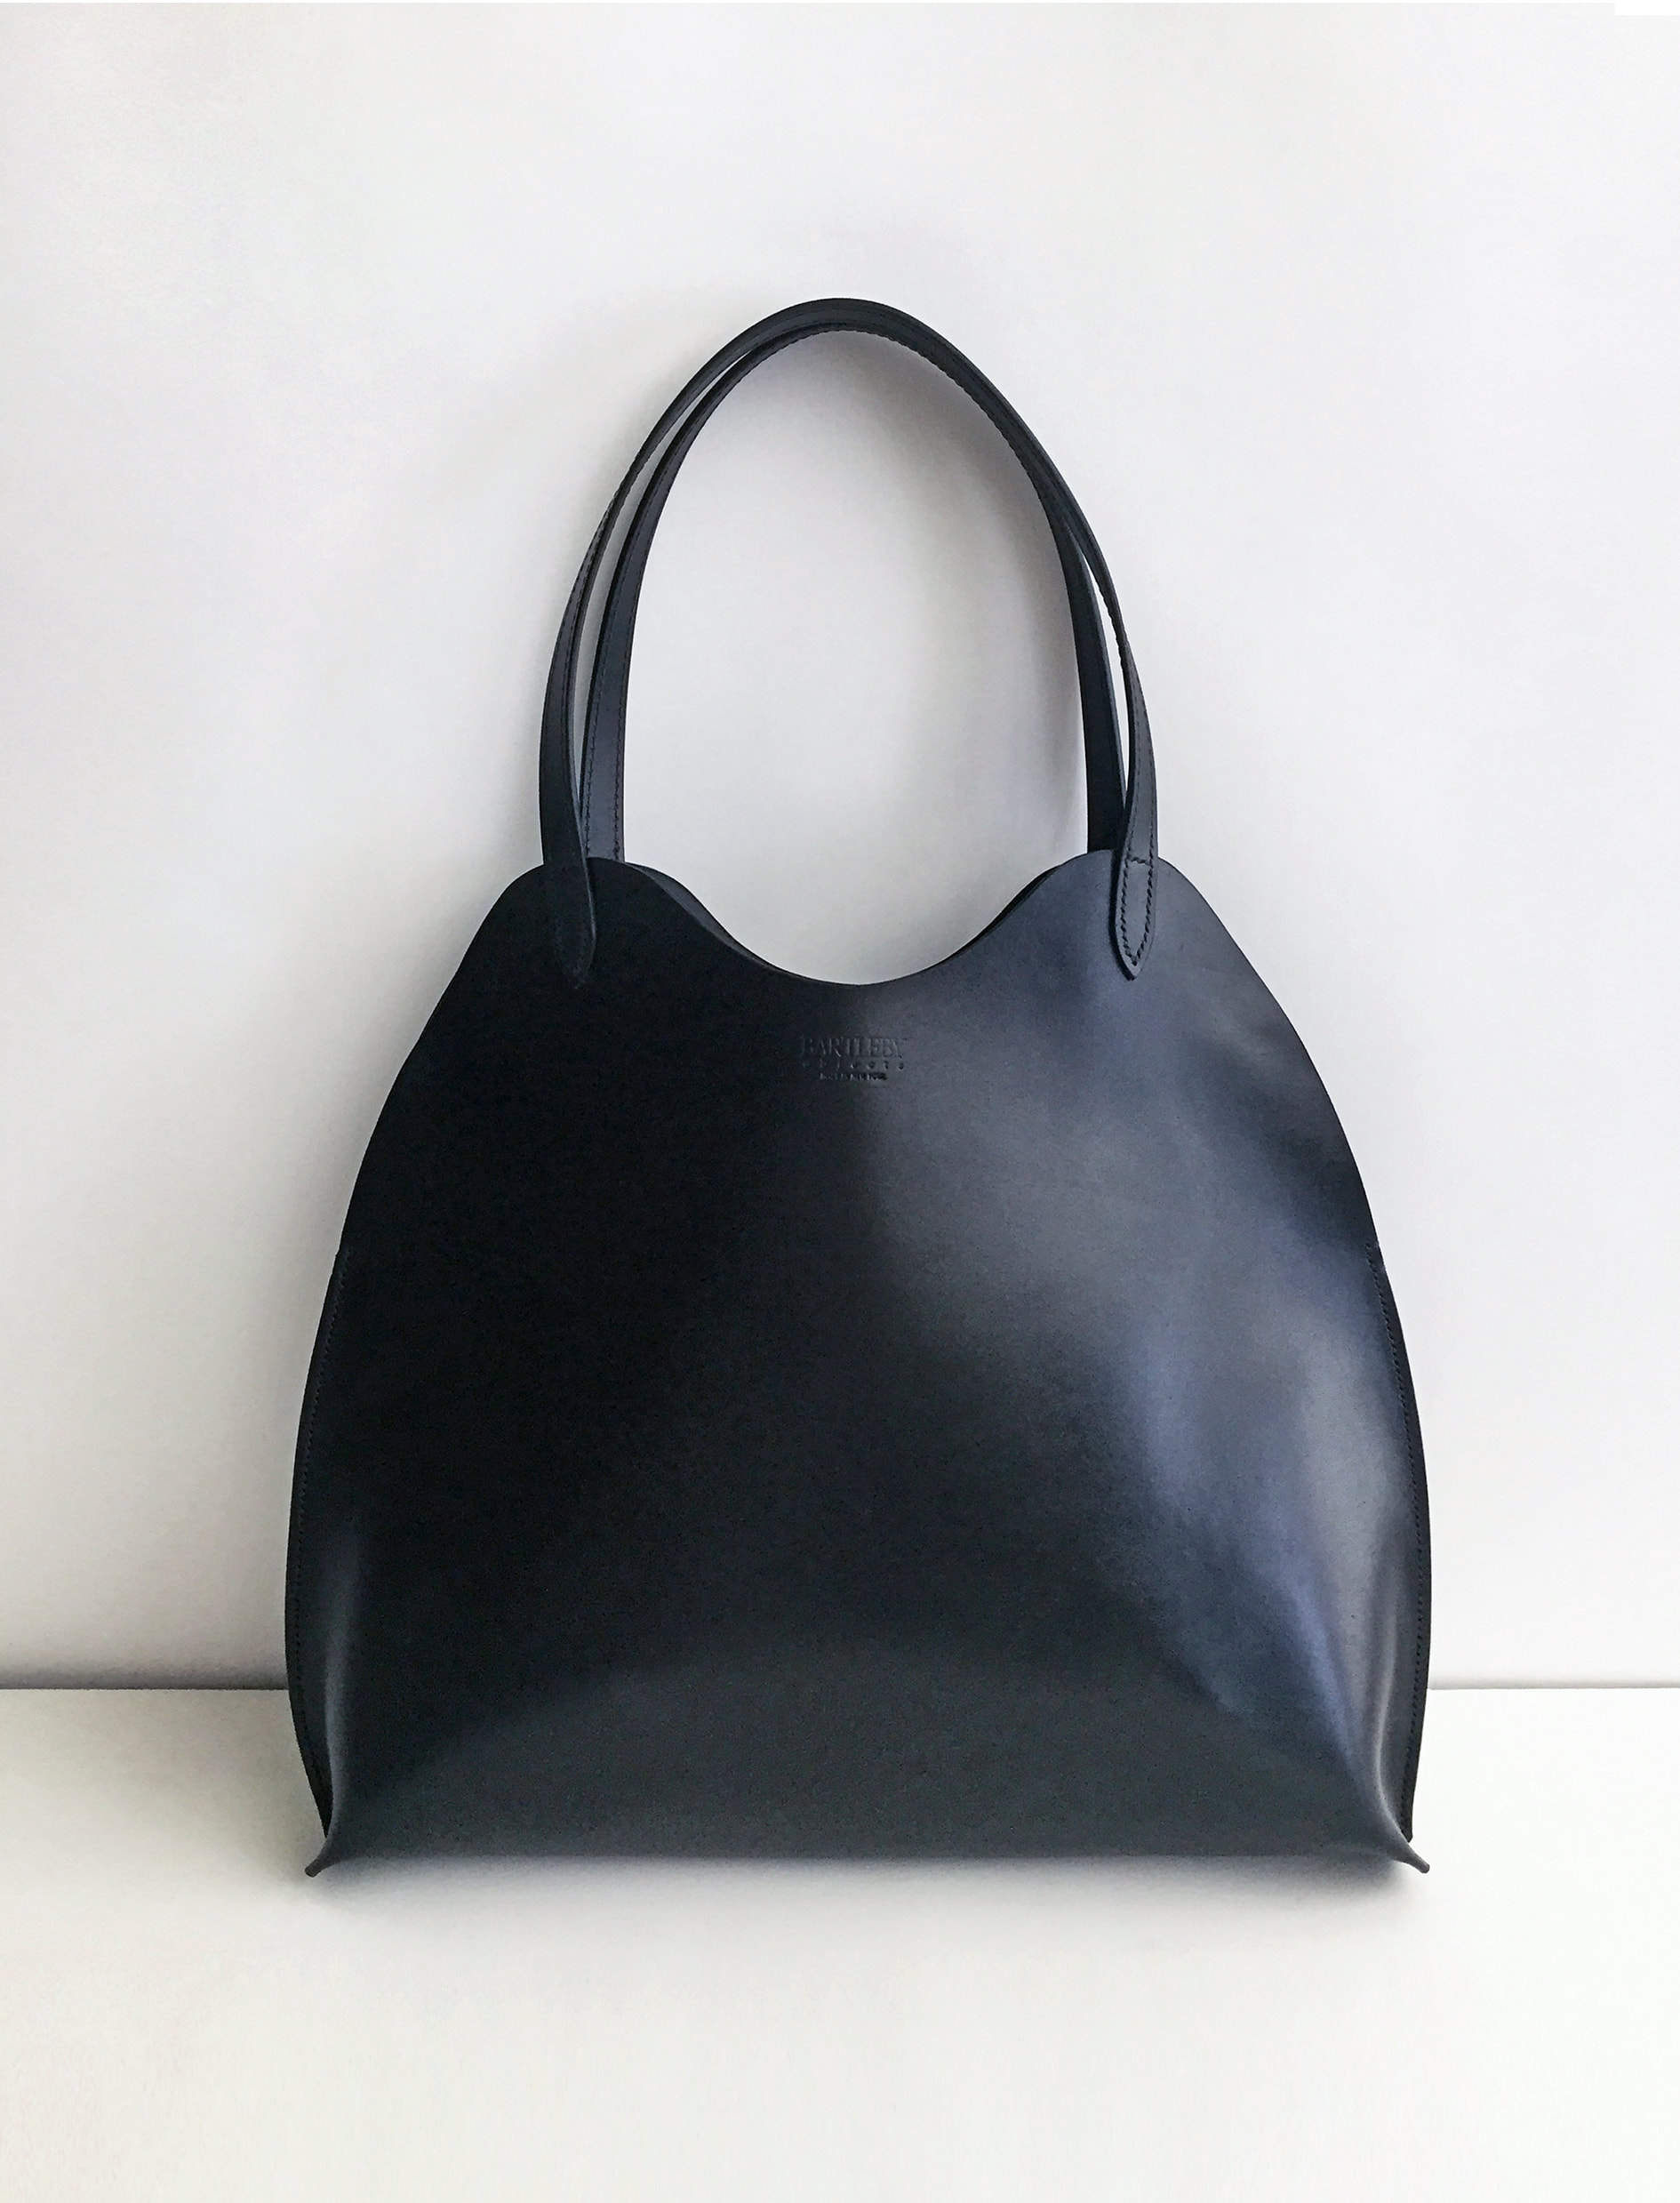 Bartleby Objects Fawkes Tote